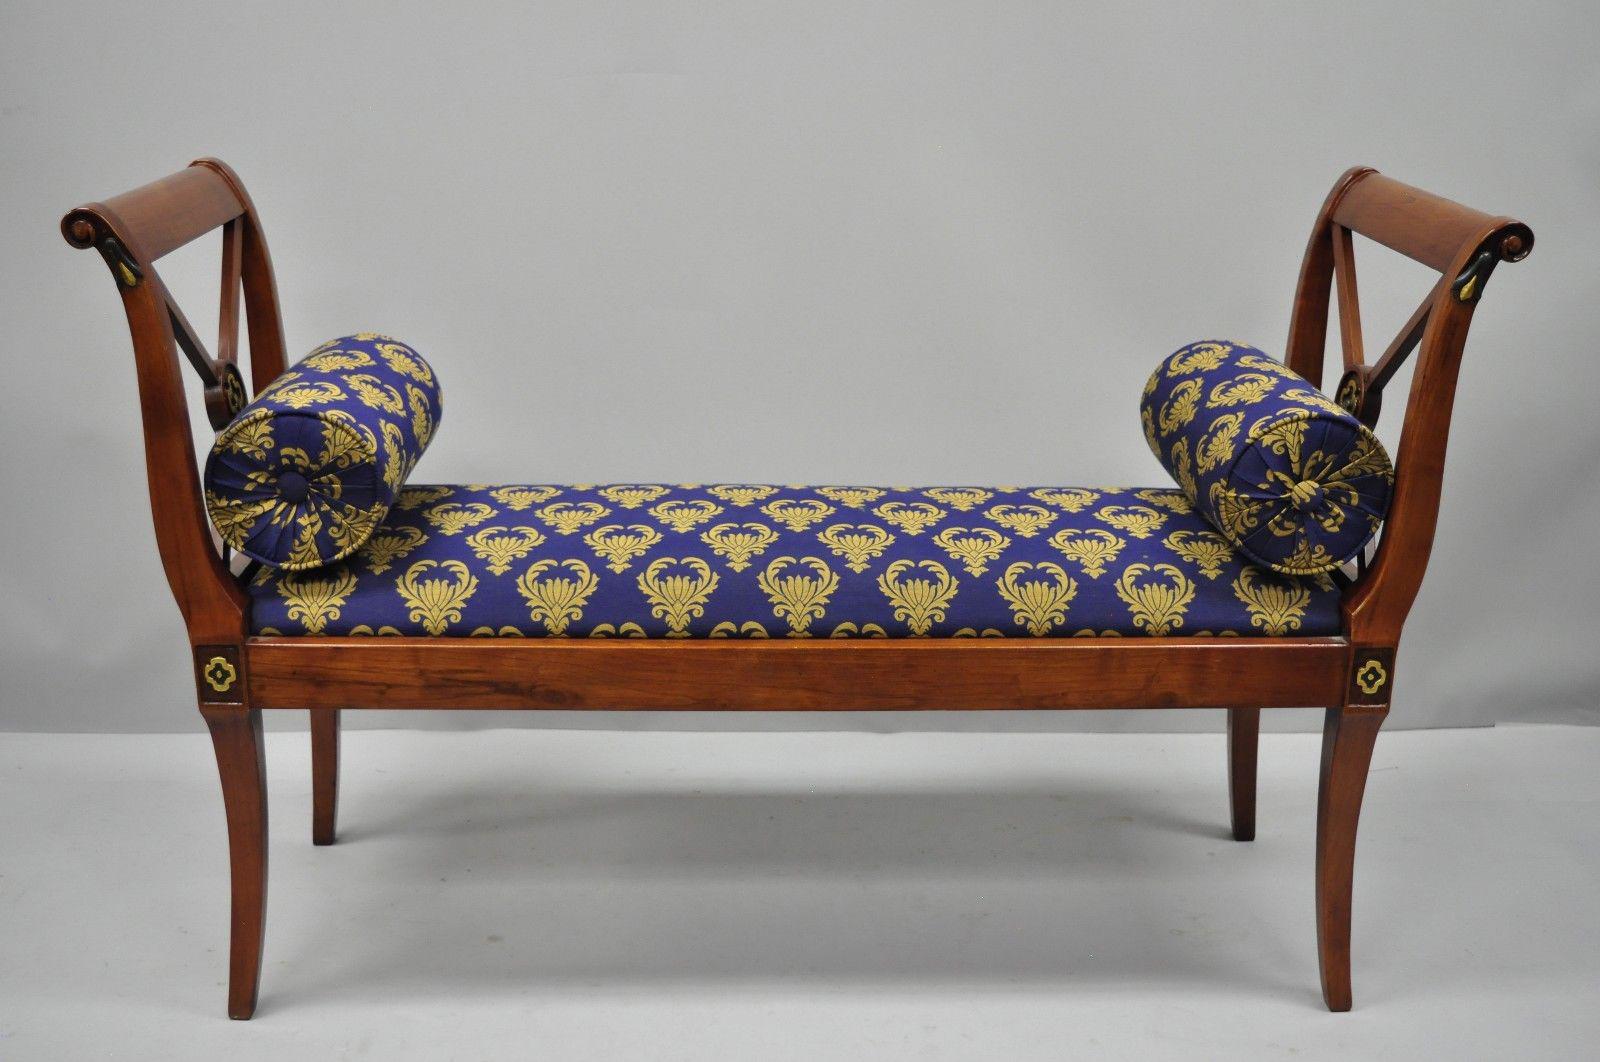 Regency style X-form bench with blue and gold fabric. Unmarked but believed to be Maitland-Smith. Acquired from an estate with lots of Maitland-Smith furniture. Item features X-form carved sides, blue and gold upholstery, painted accents, solid wood